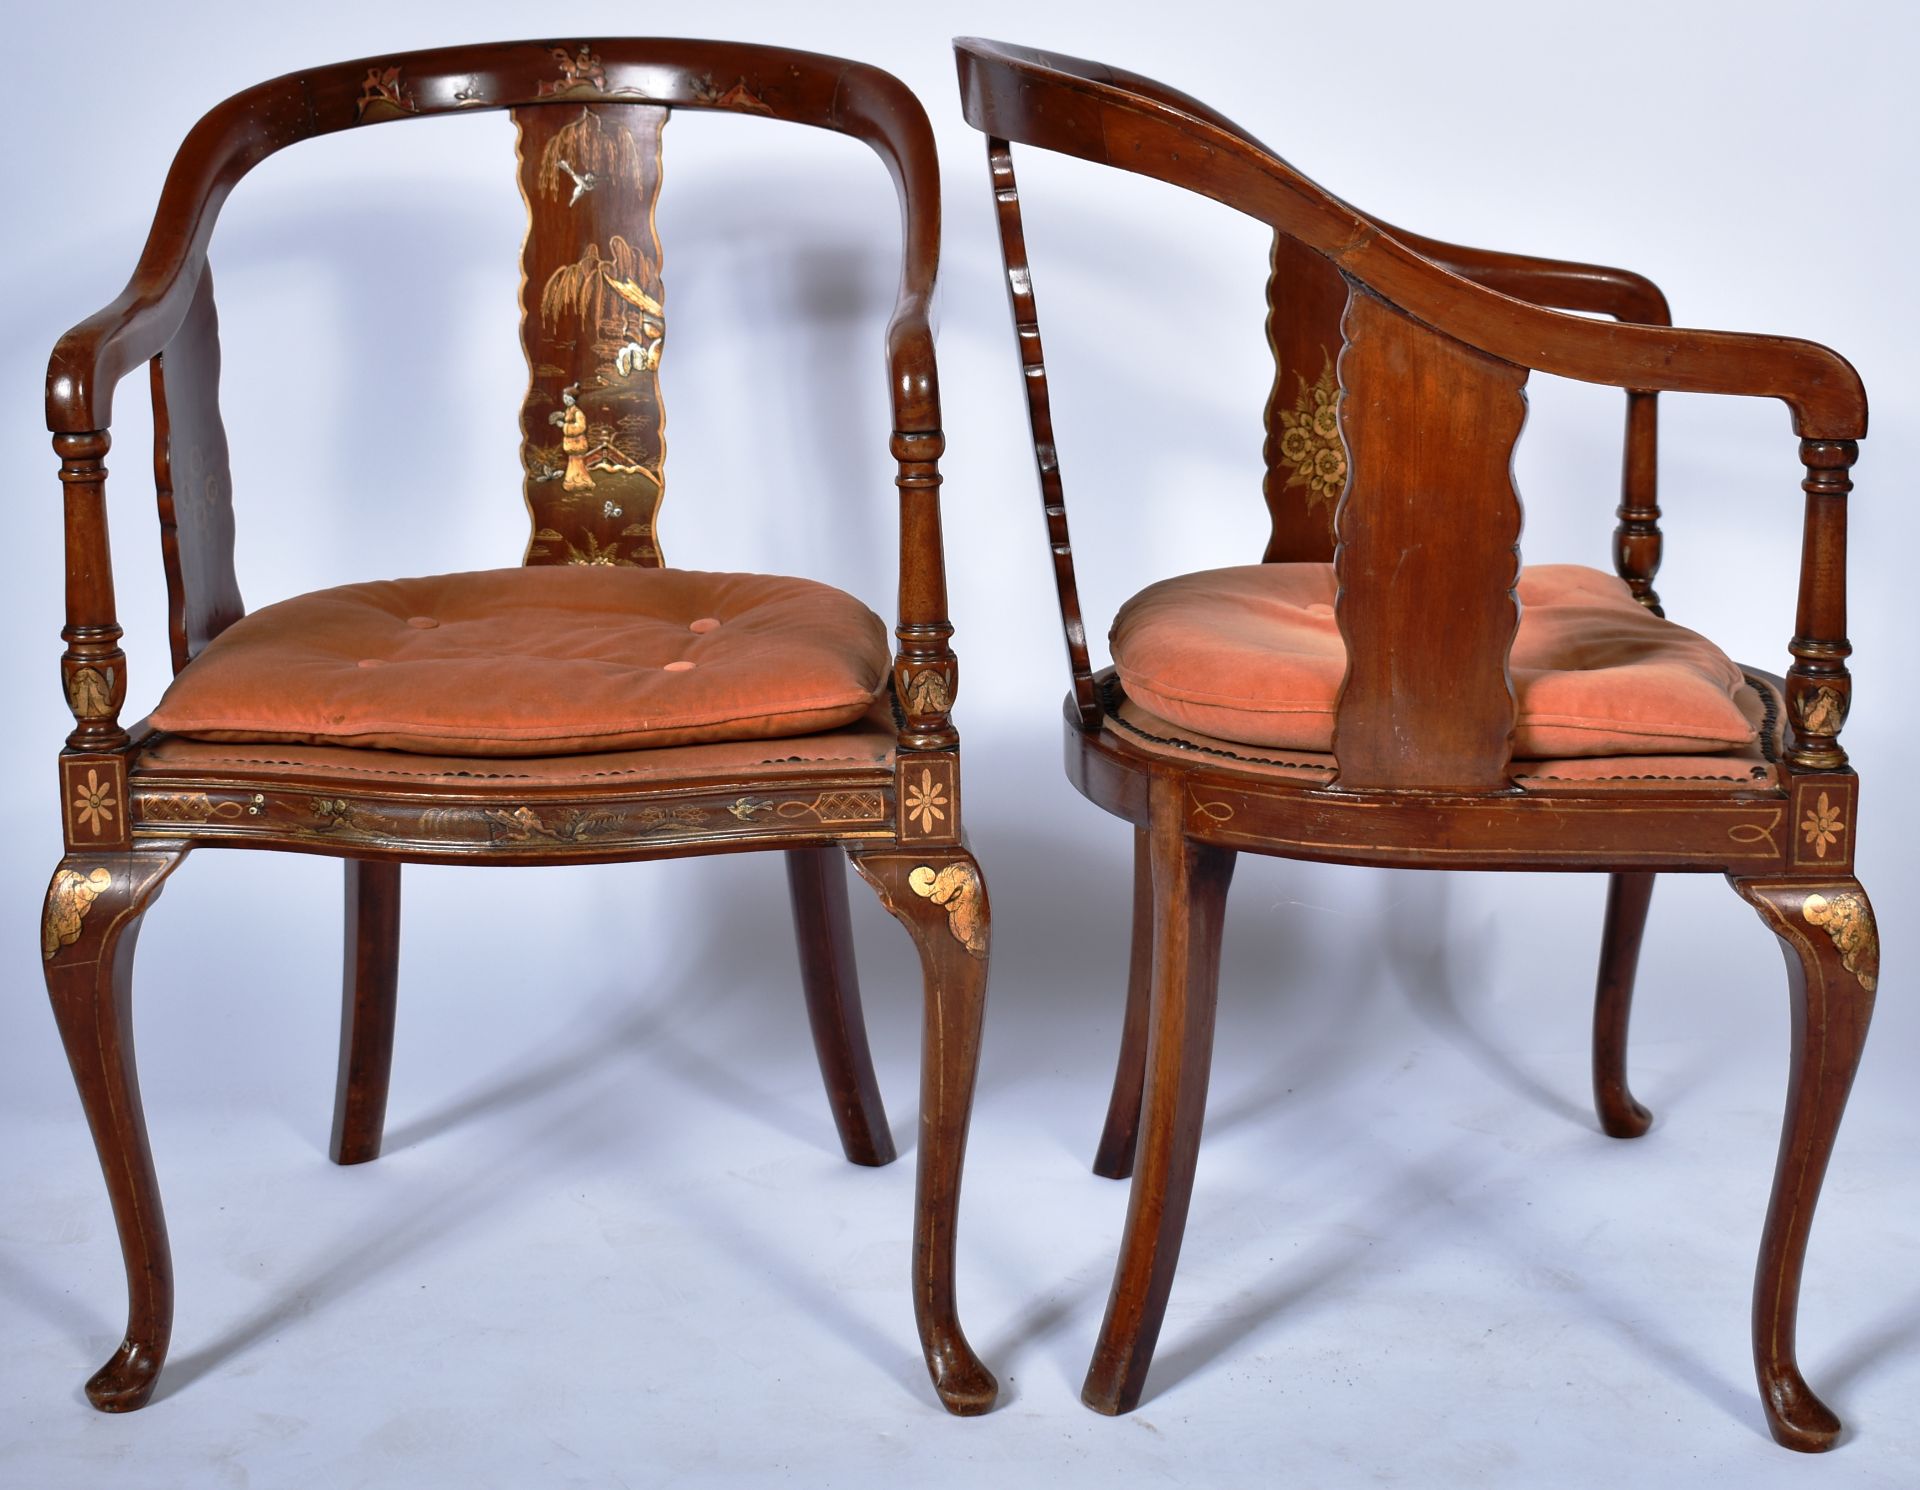 MATCHING PAIR OF 19TH CENTURY CHINOISERIE ARMCHAIRS - Image 5 of 8